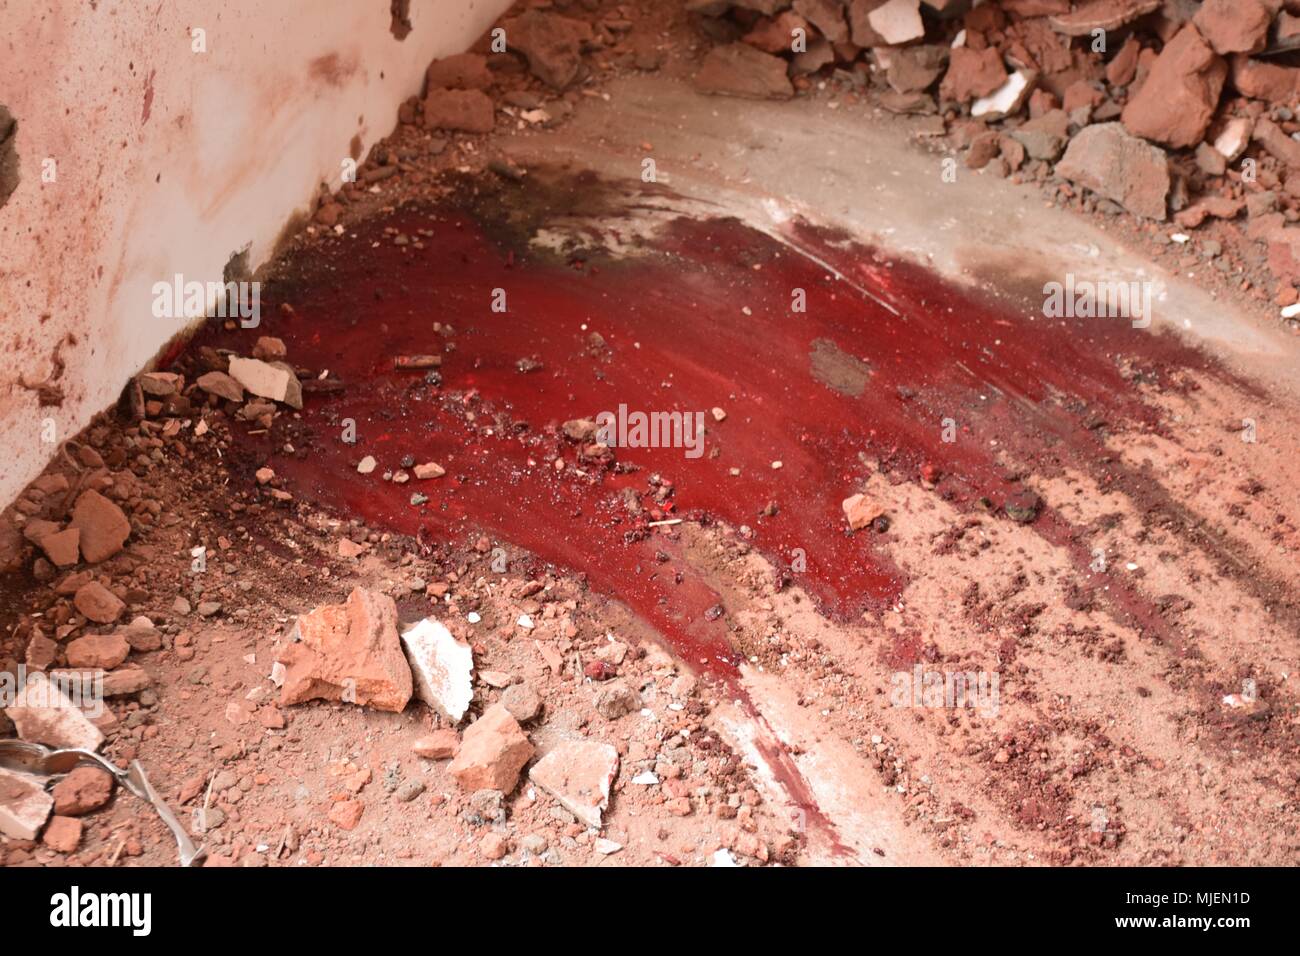 Editors Note Image Contains Graphic Content Blood Scattered Over